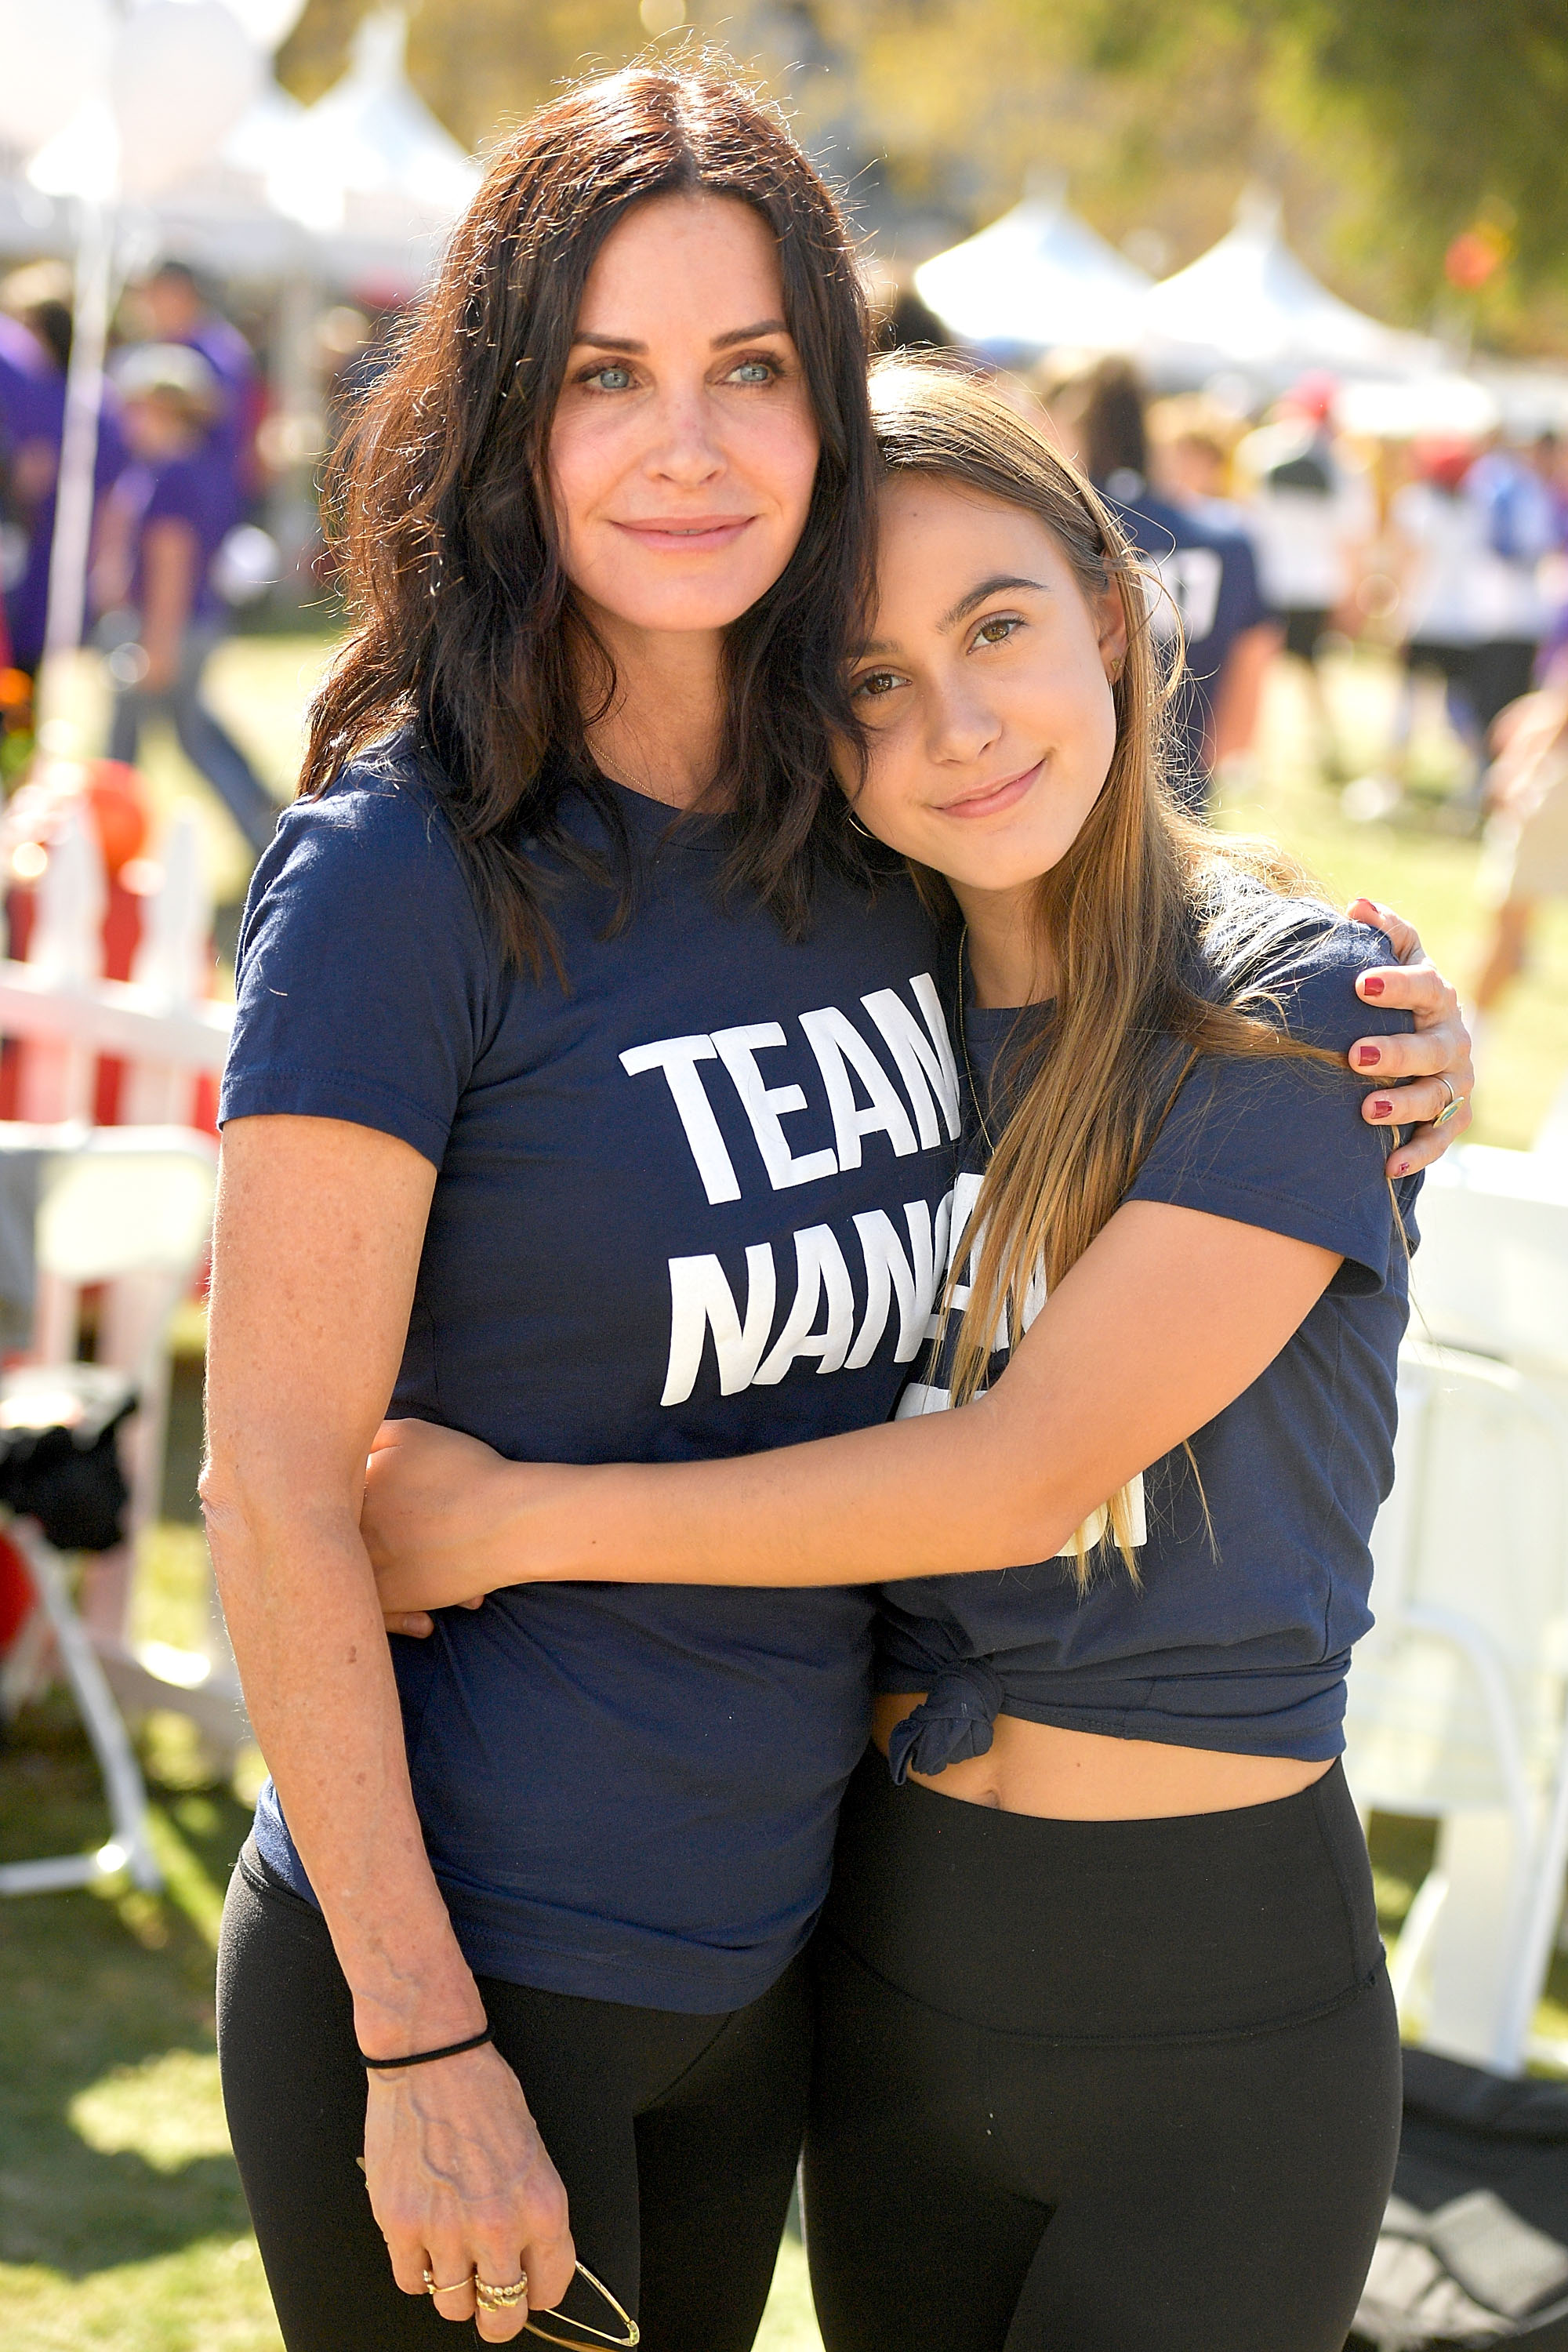 Courteney Cox and her daughter Coco Arquette at the Nanci Ryder's "Team Nanci" participates in the 15th Annual LA County Walk to Defeat ALS on October 15, 2017, in Los Angeles, California. | Source: Getty Images